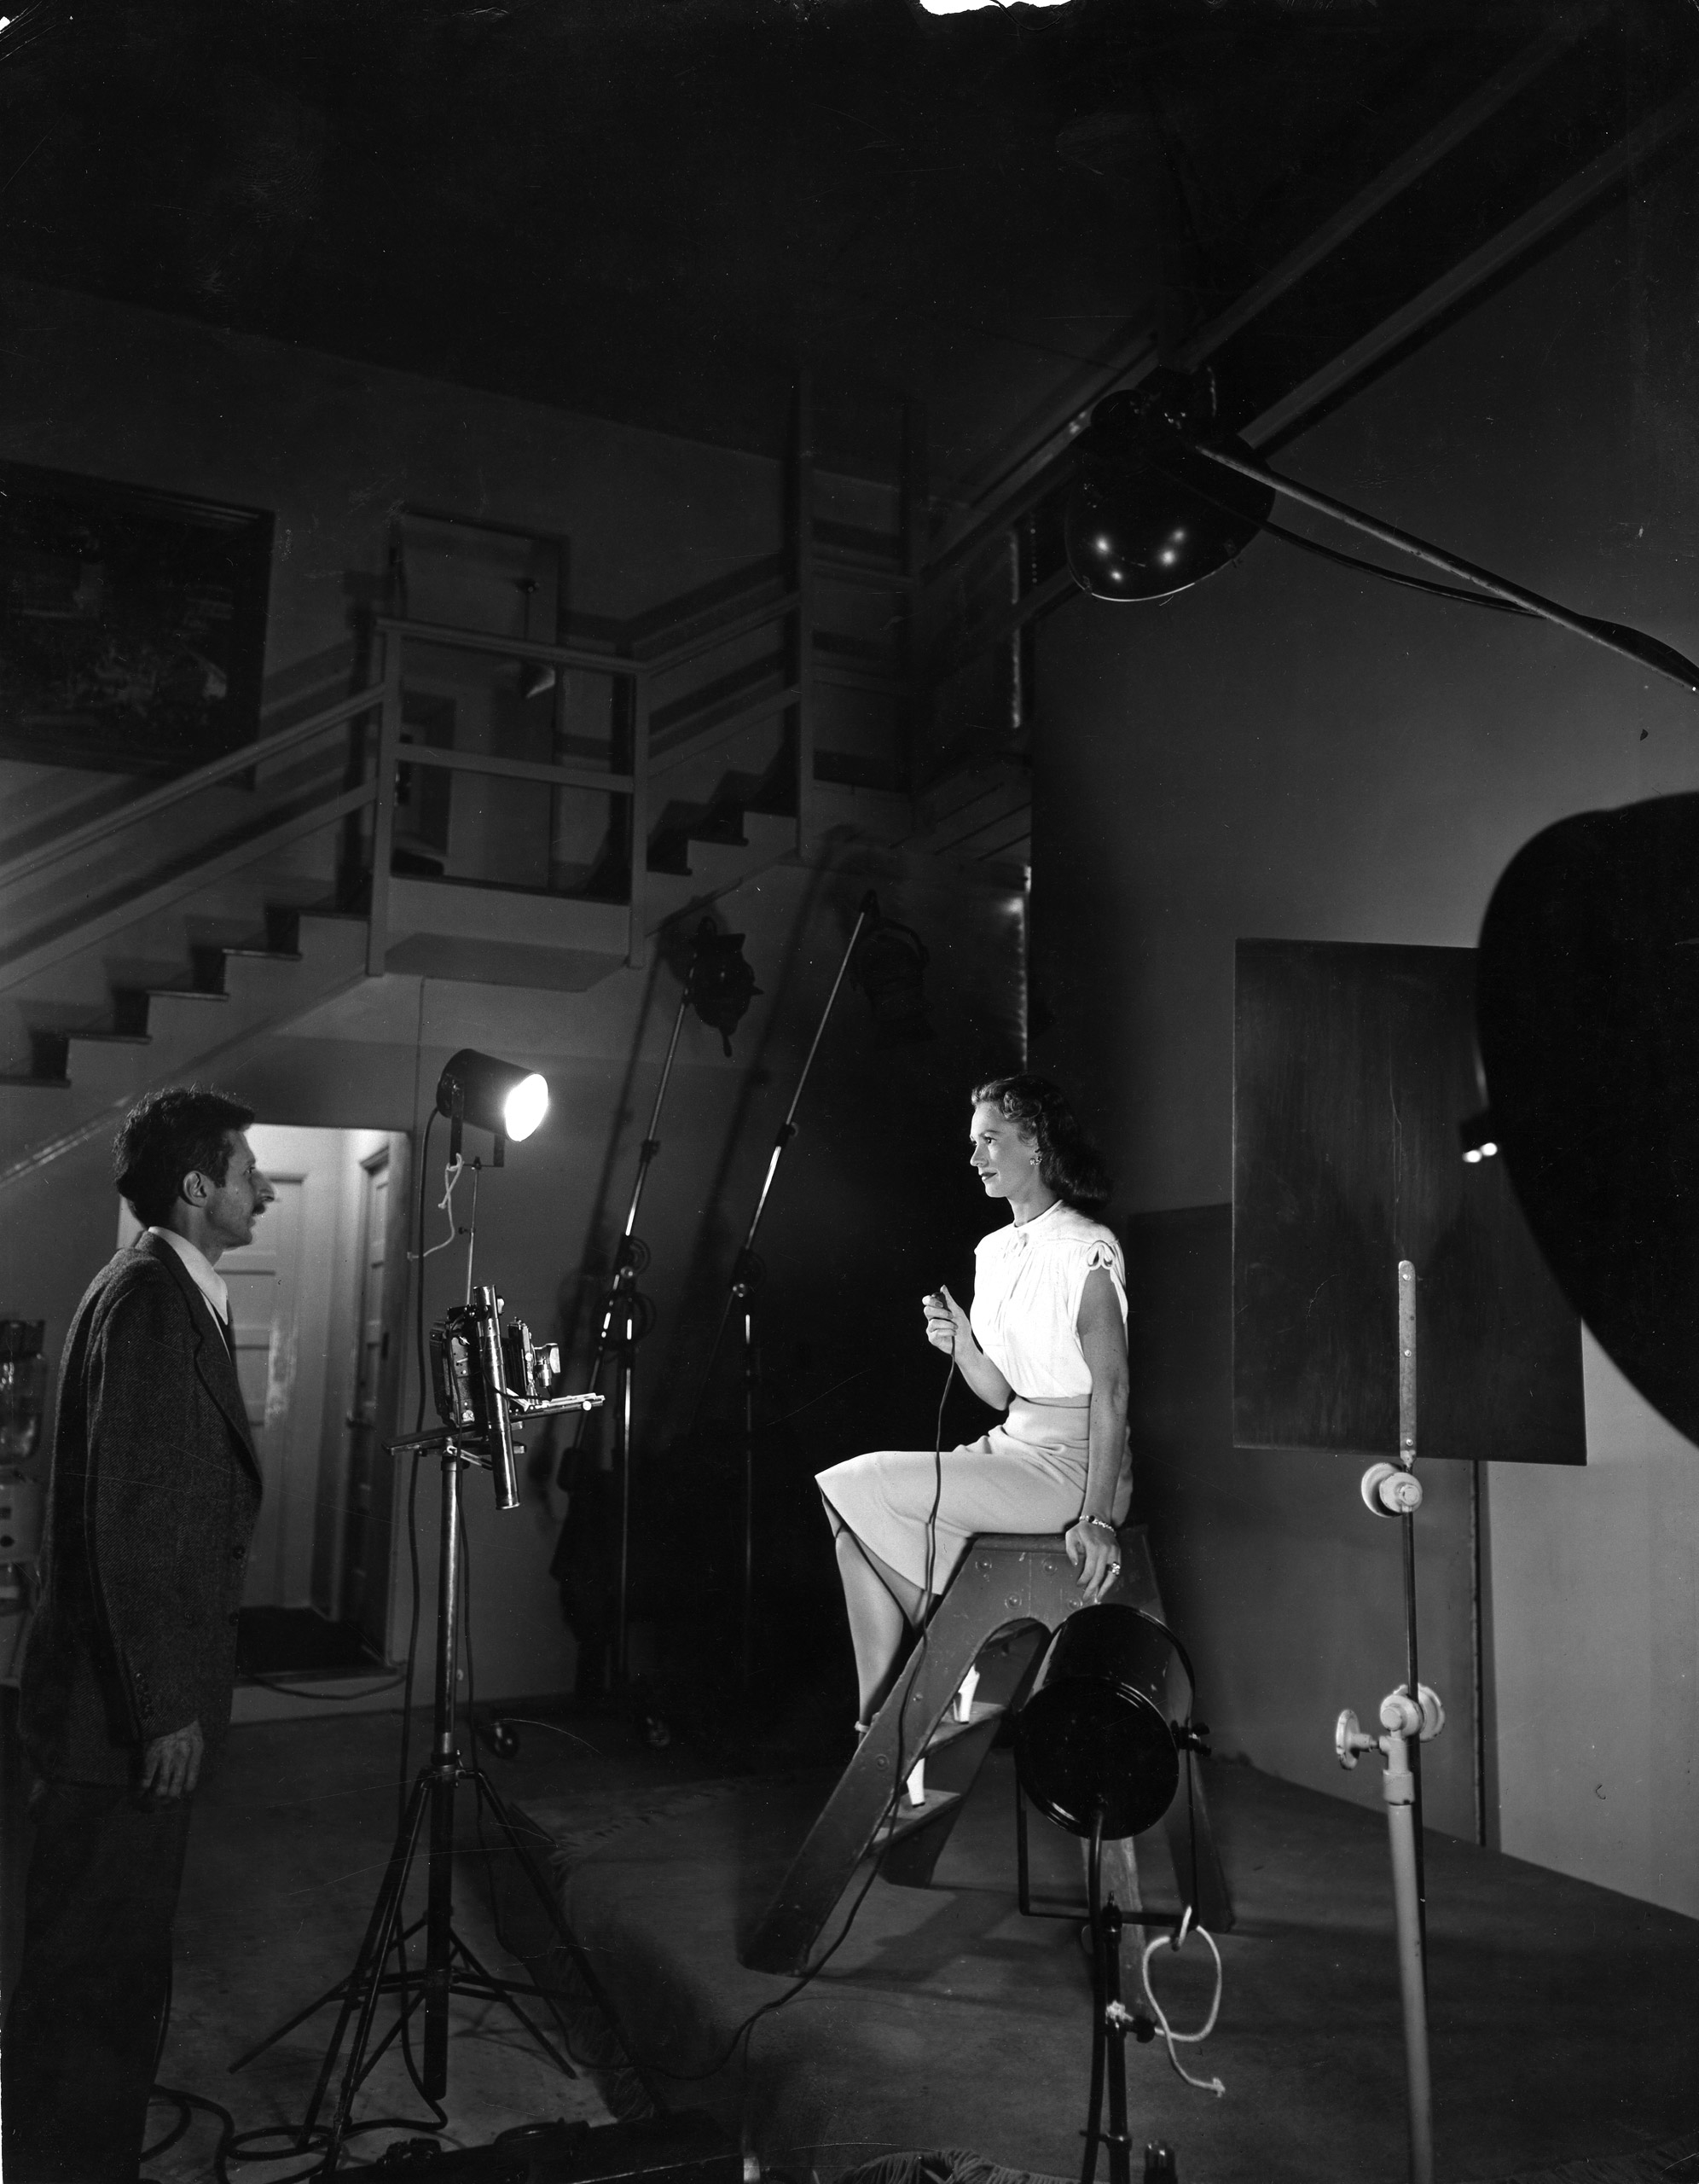 Photographer Gjon Mili instructing actress Geraldine Fitzgerald on how to take her own photograph.